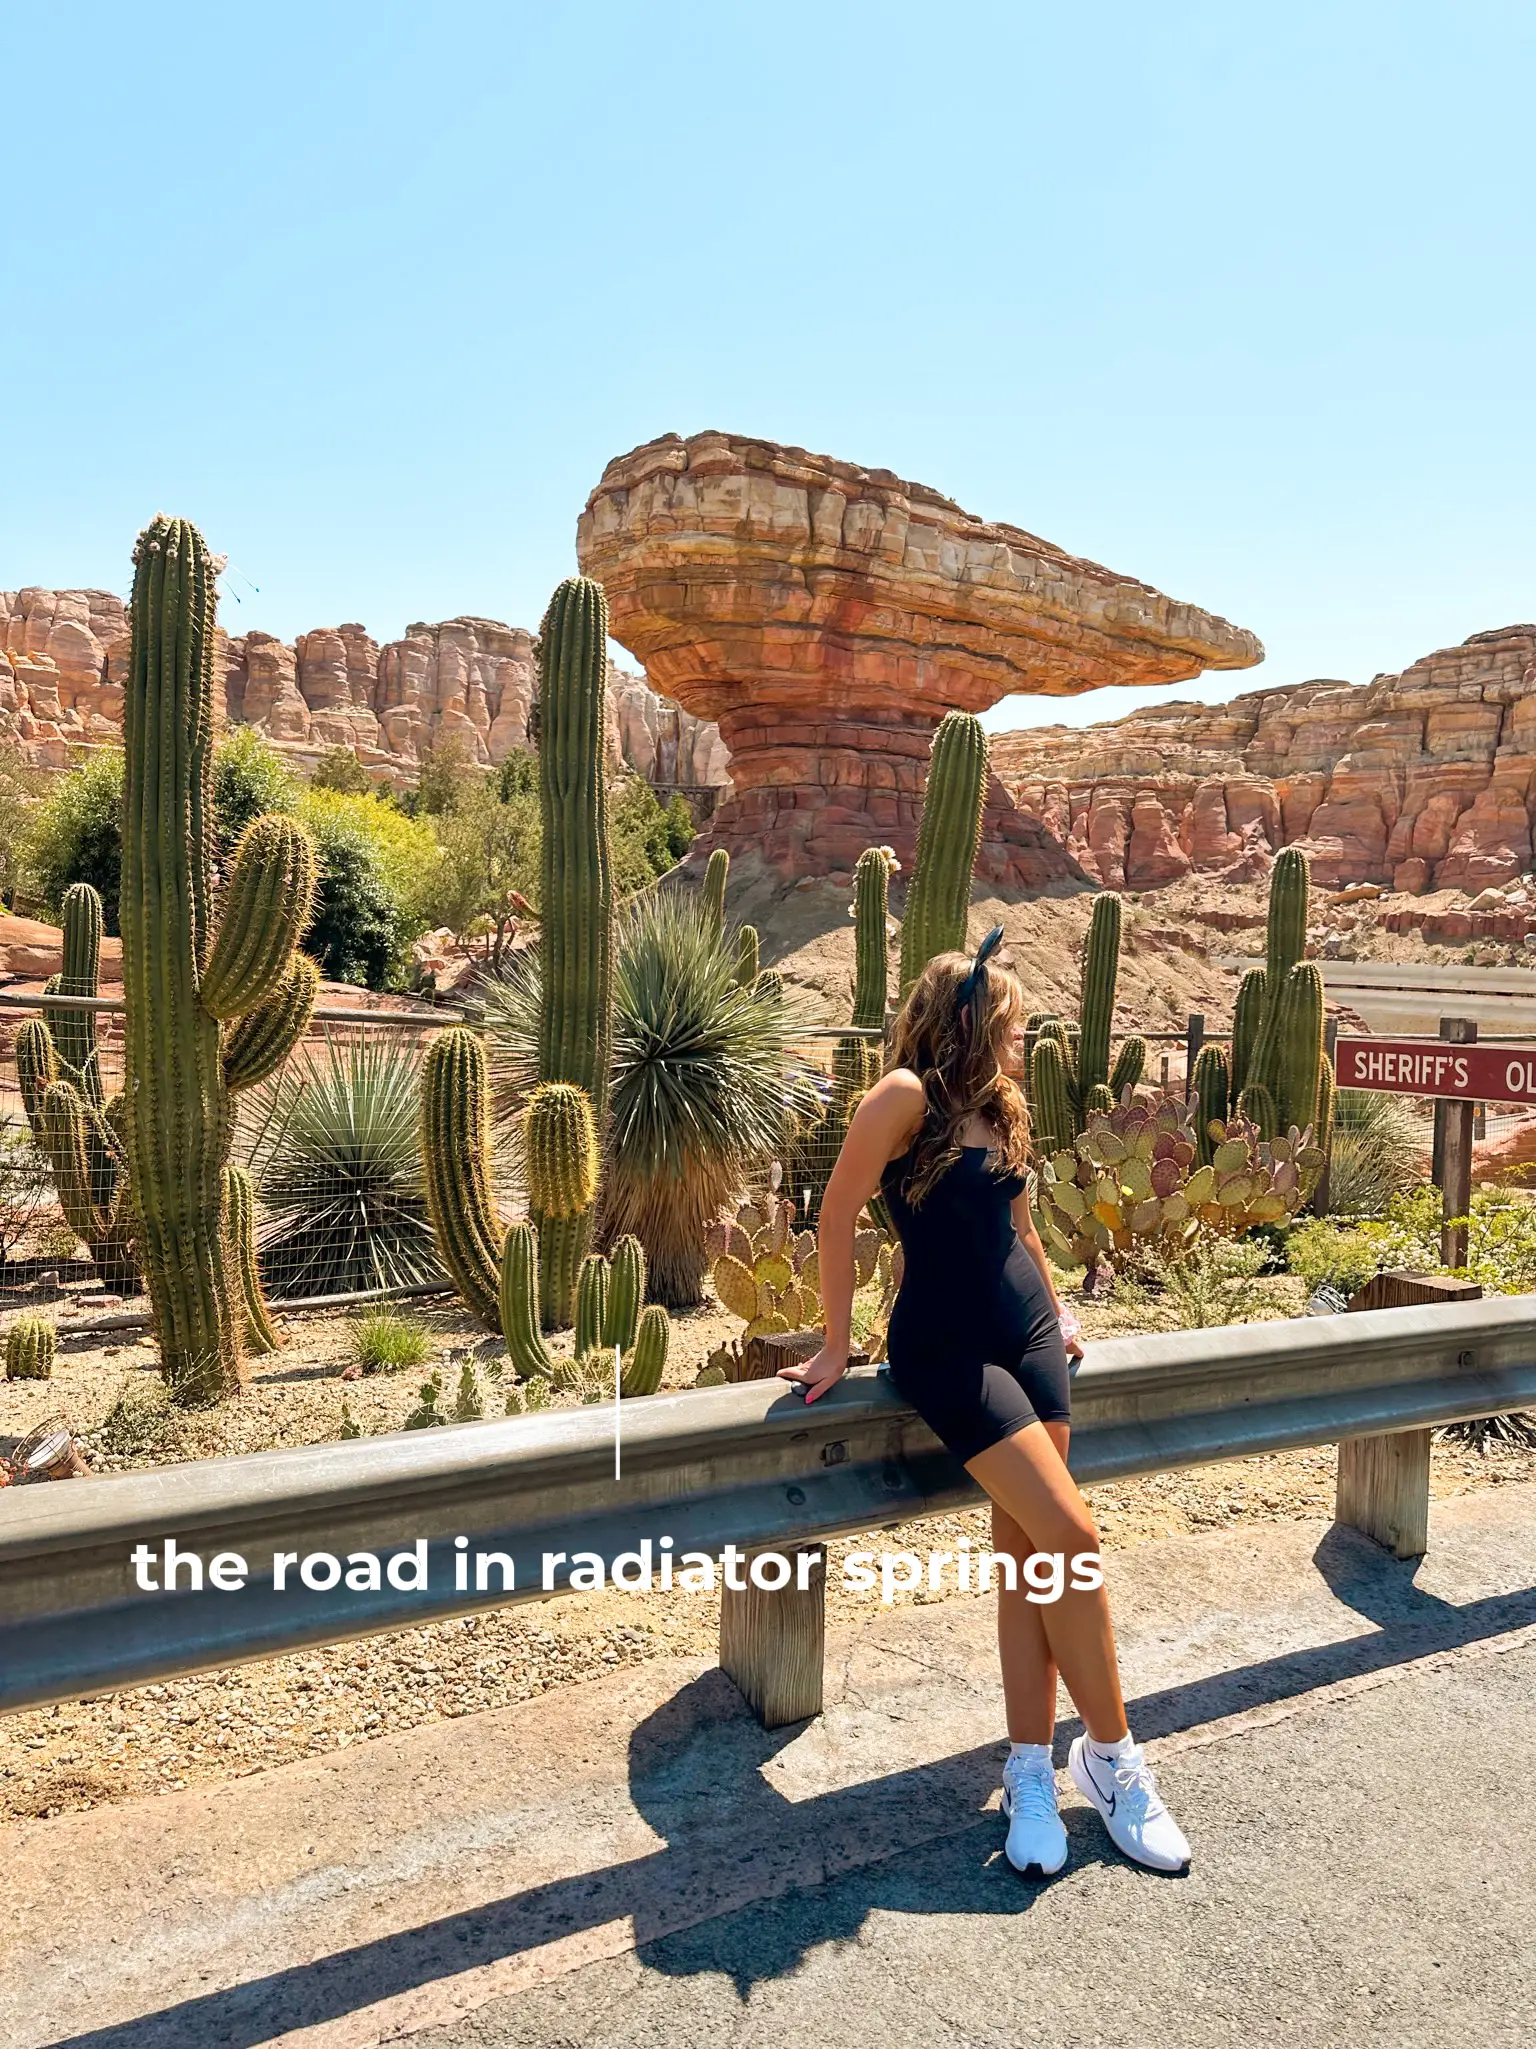  A woman is sitting on a fence near a road with cacti and a sign that says "road in radiator springs".